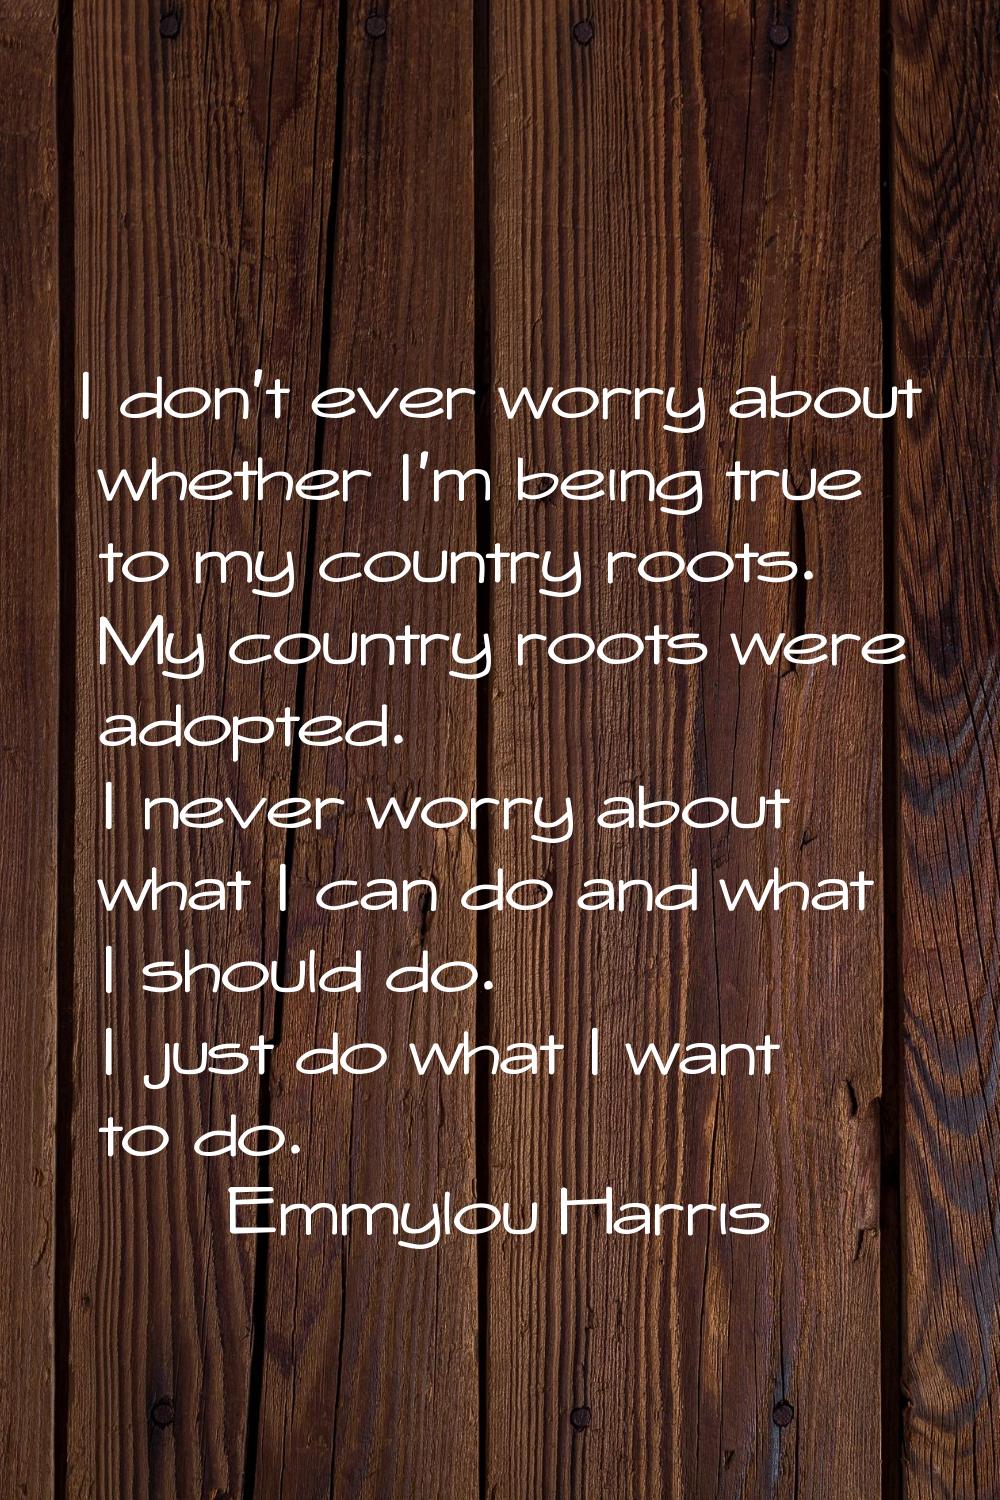 I don't ever worry about whether I'm being true to my country roots. My country roots were adopted.